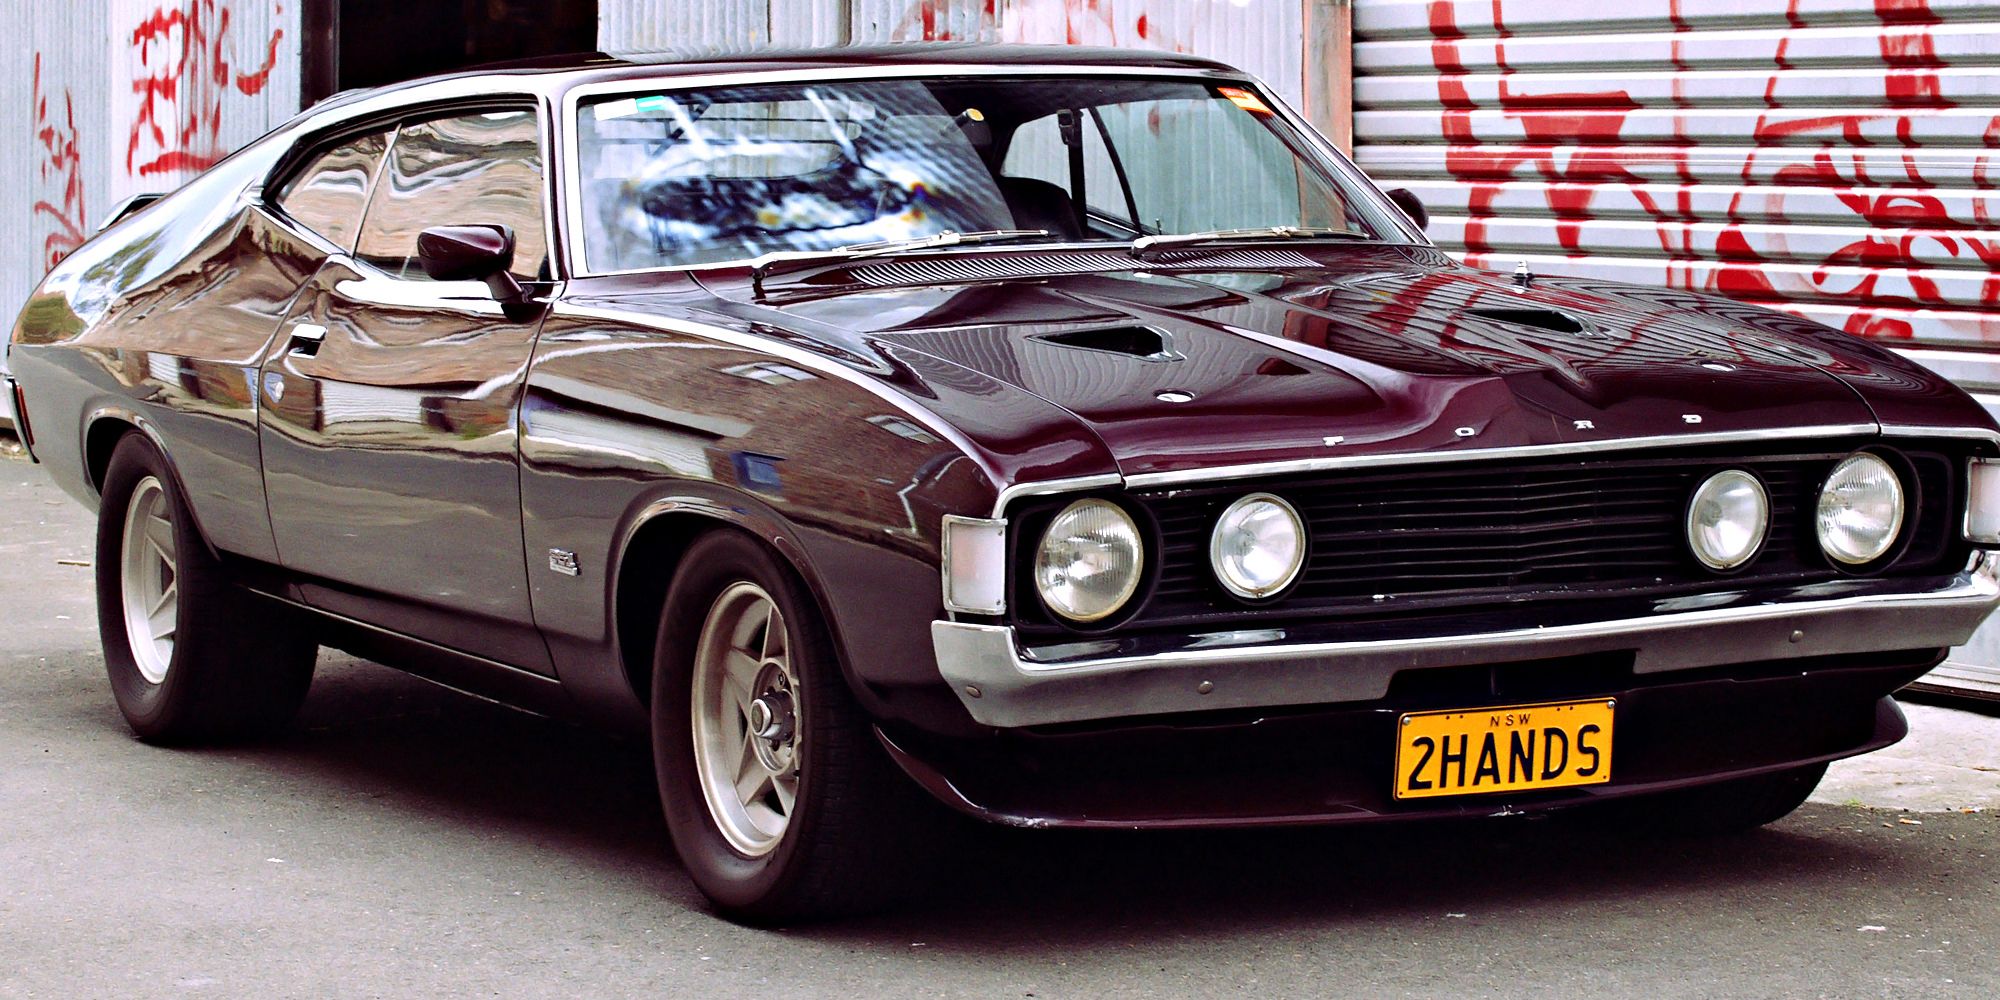 The front of the XB Falcon